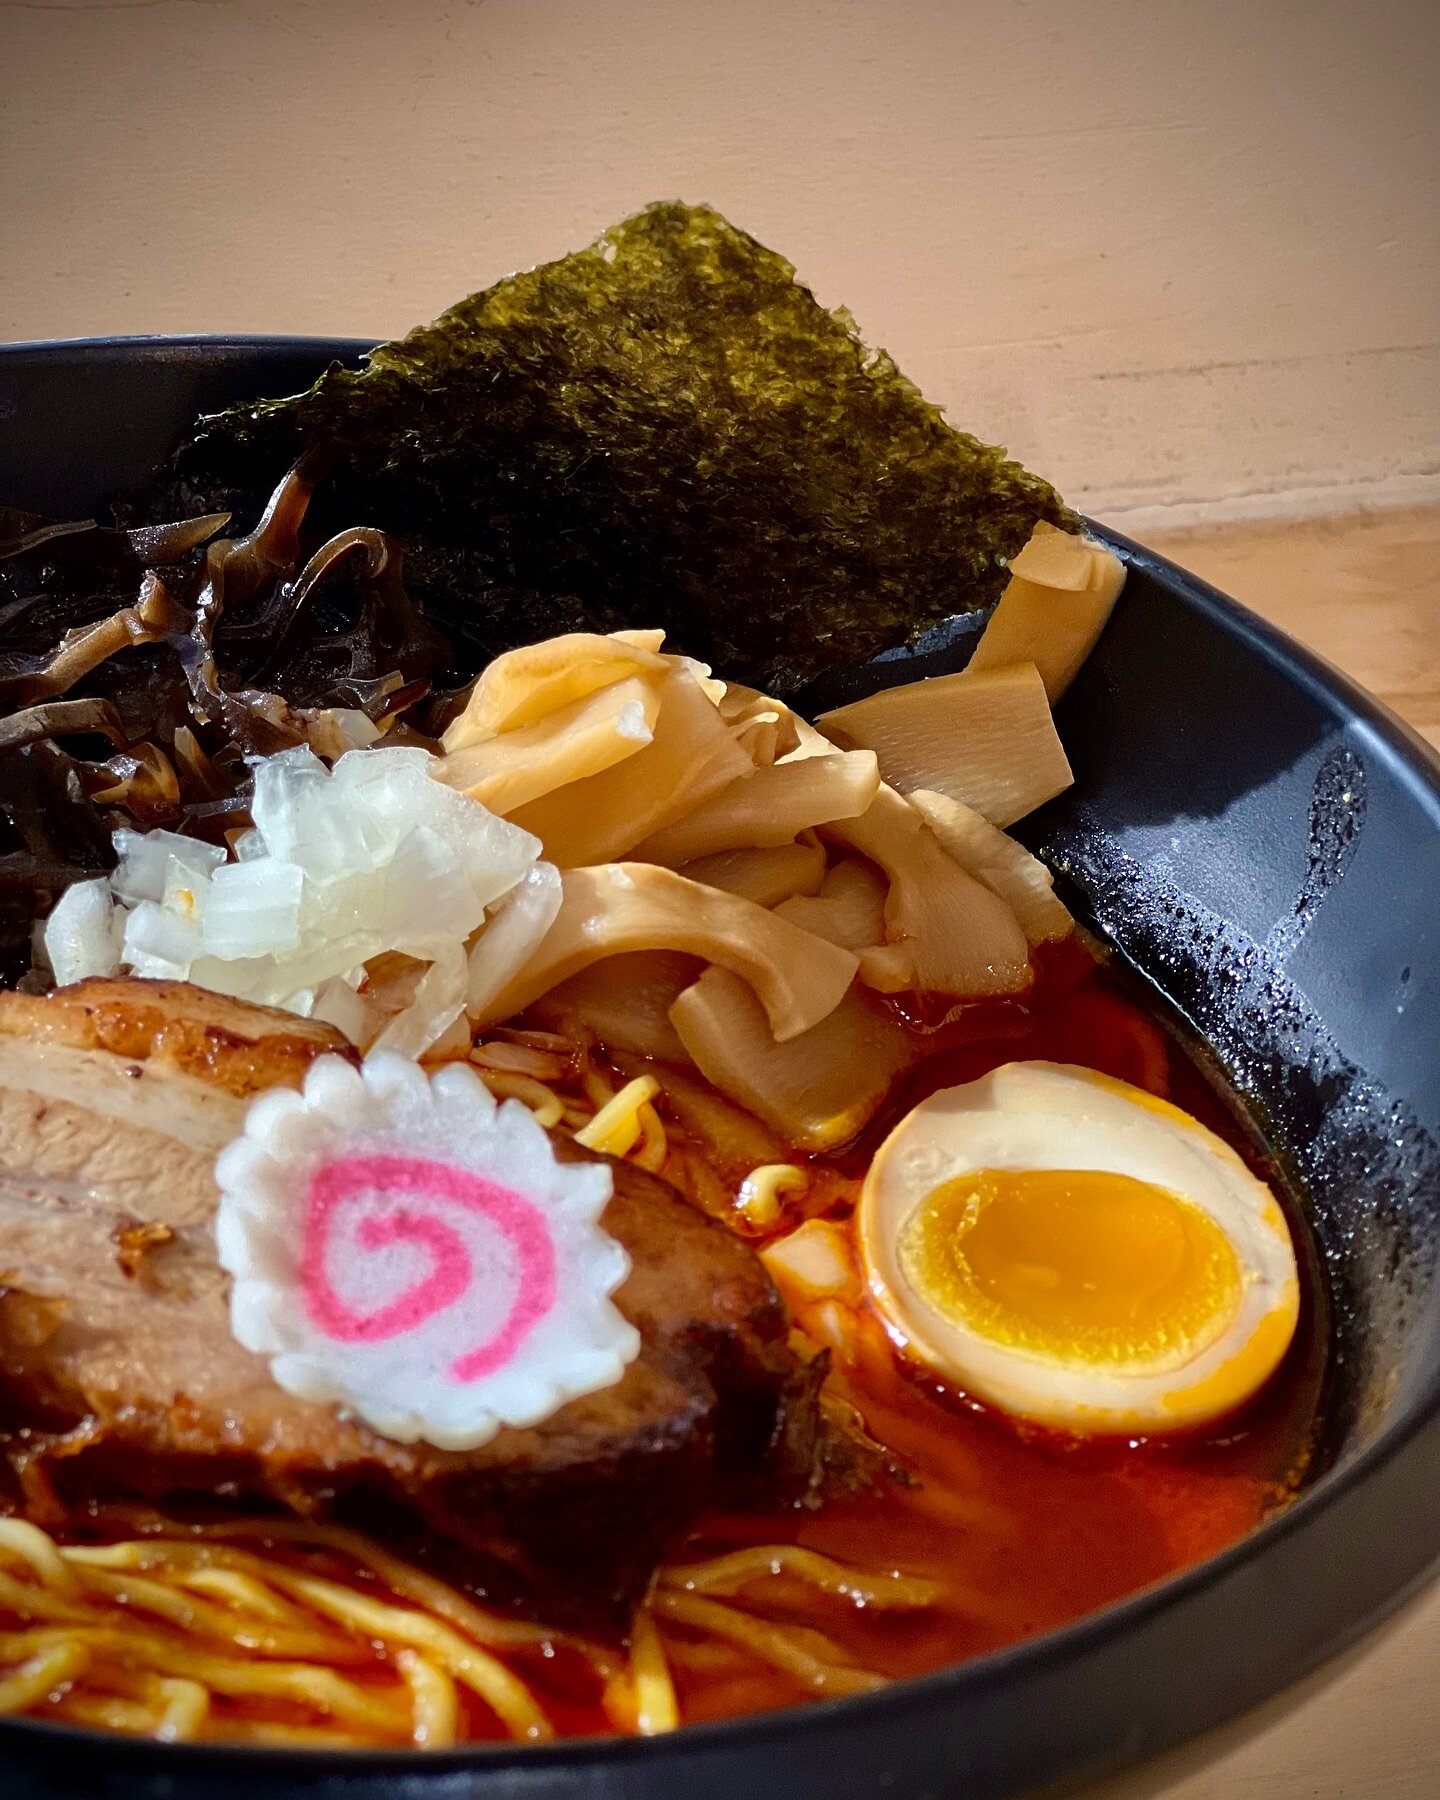 Our spicy miso ramen is the ultimate thrill ride for your taste buds 🌋🍜 get ready to spice up your life 🔥

📍Noods Bar - Rancho Cucamonga ⁠
12780 Foothill Blvd, Rancho Cucamonga, CA 91739⁠
☎️ (909) 899-0101⁠
.⁠
.⁠
.⁠
#ramen #japaneseramen #noodles